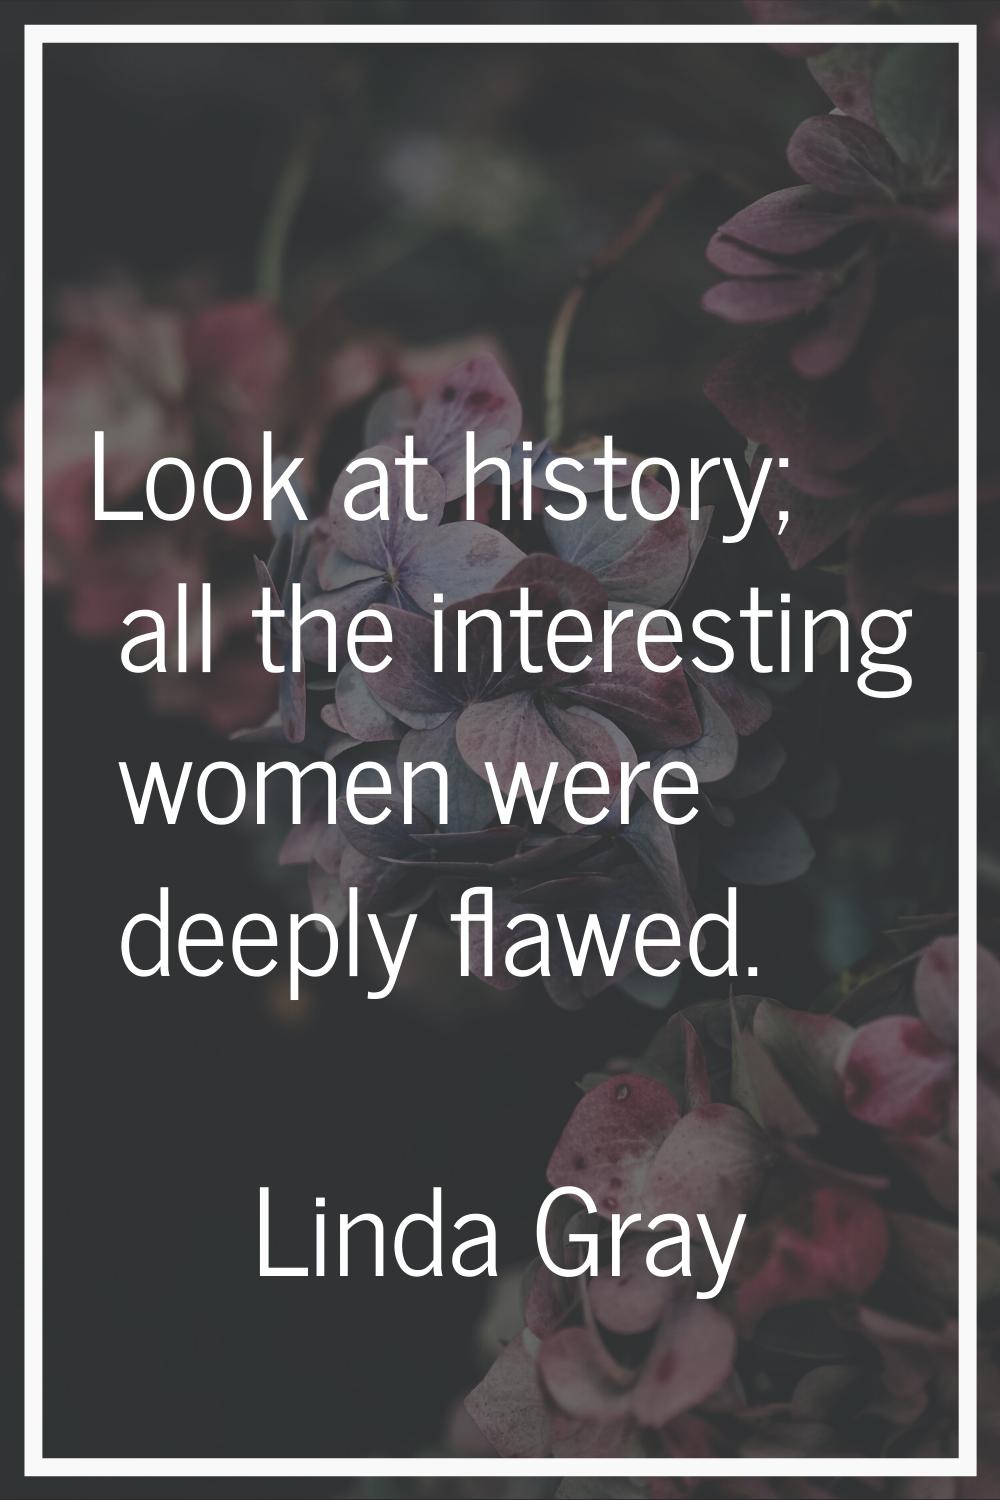 Look at history; all the interesting women were deeply flawed.